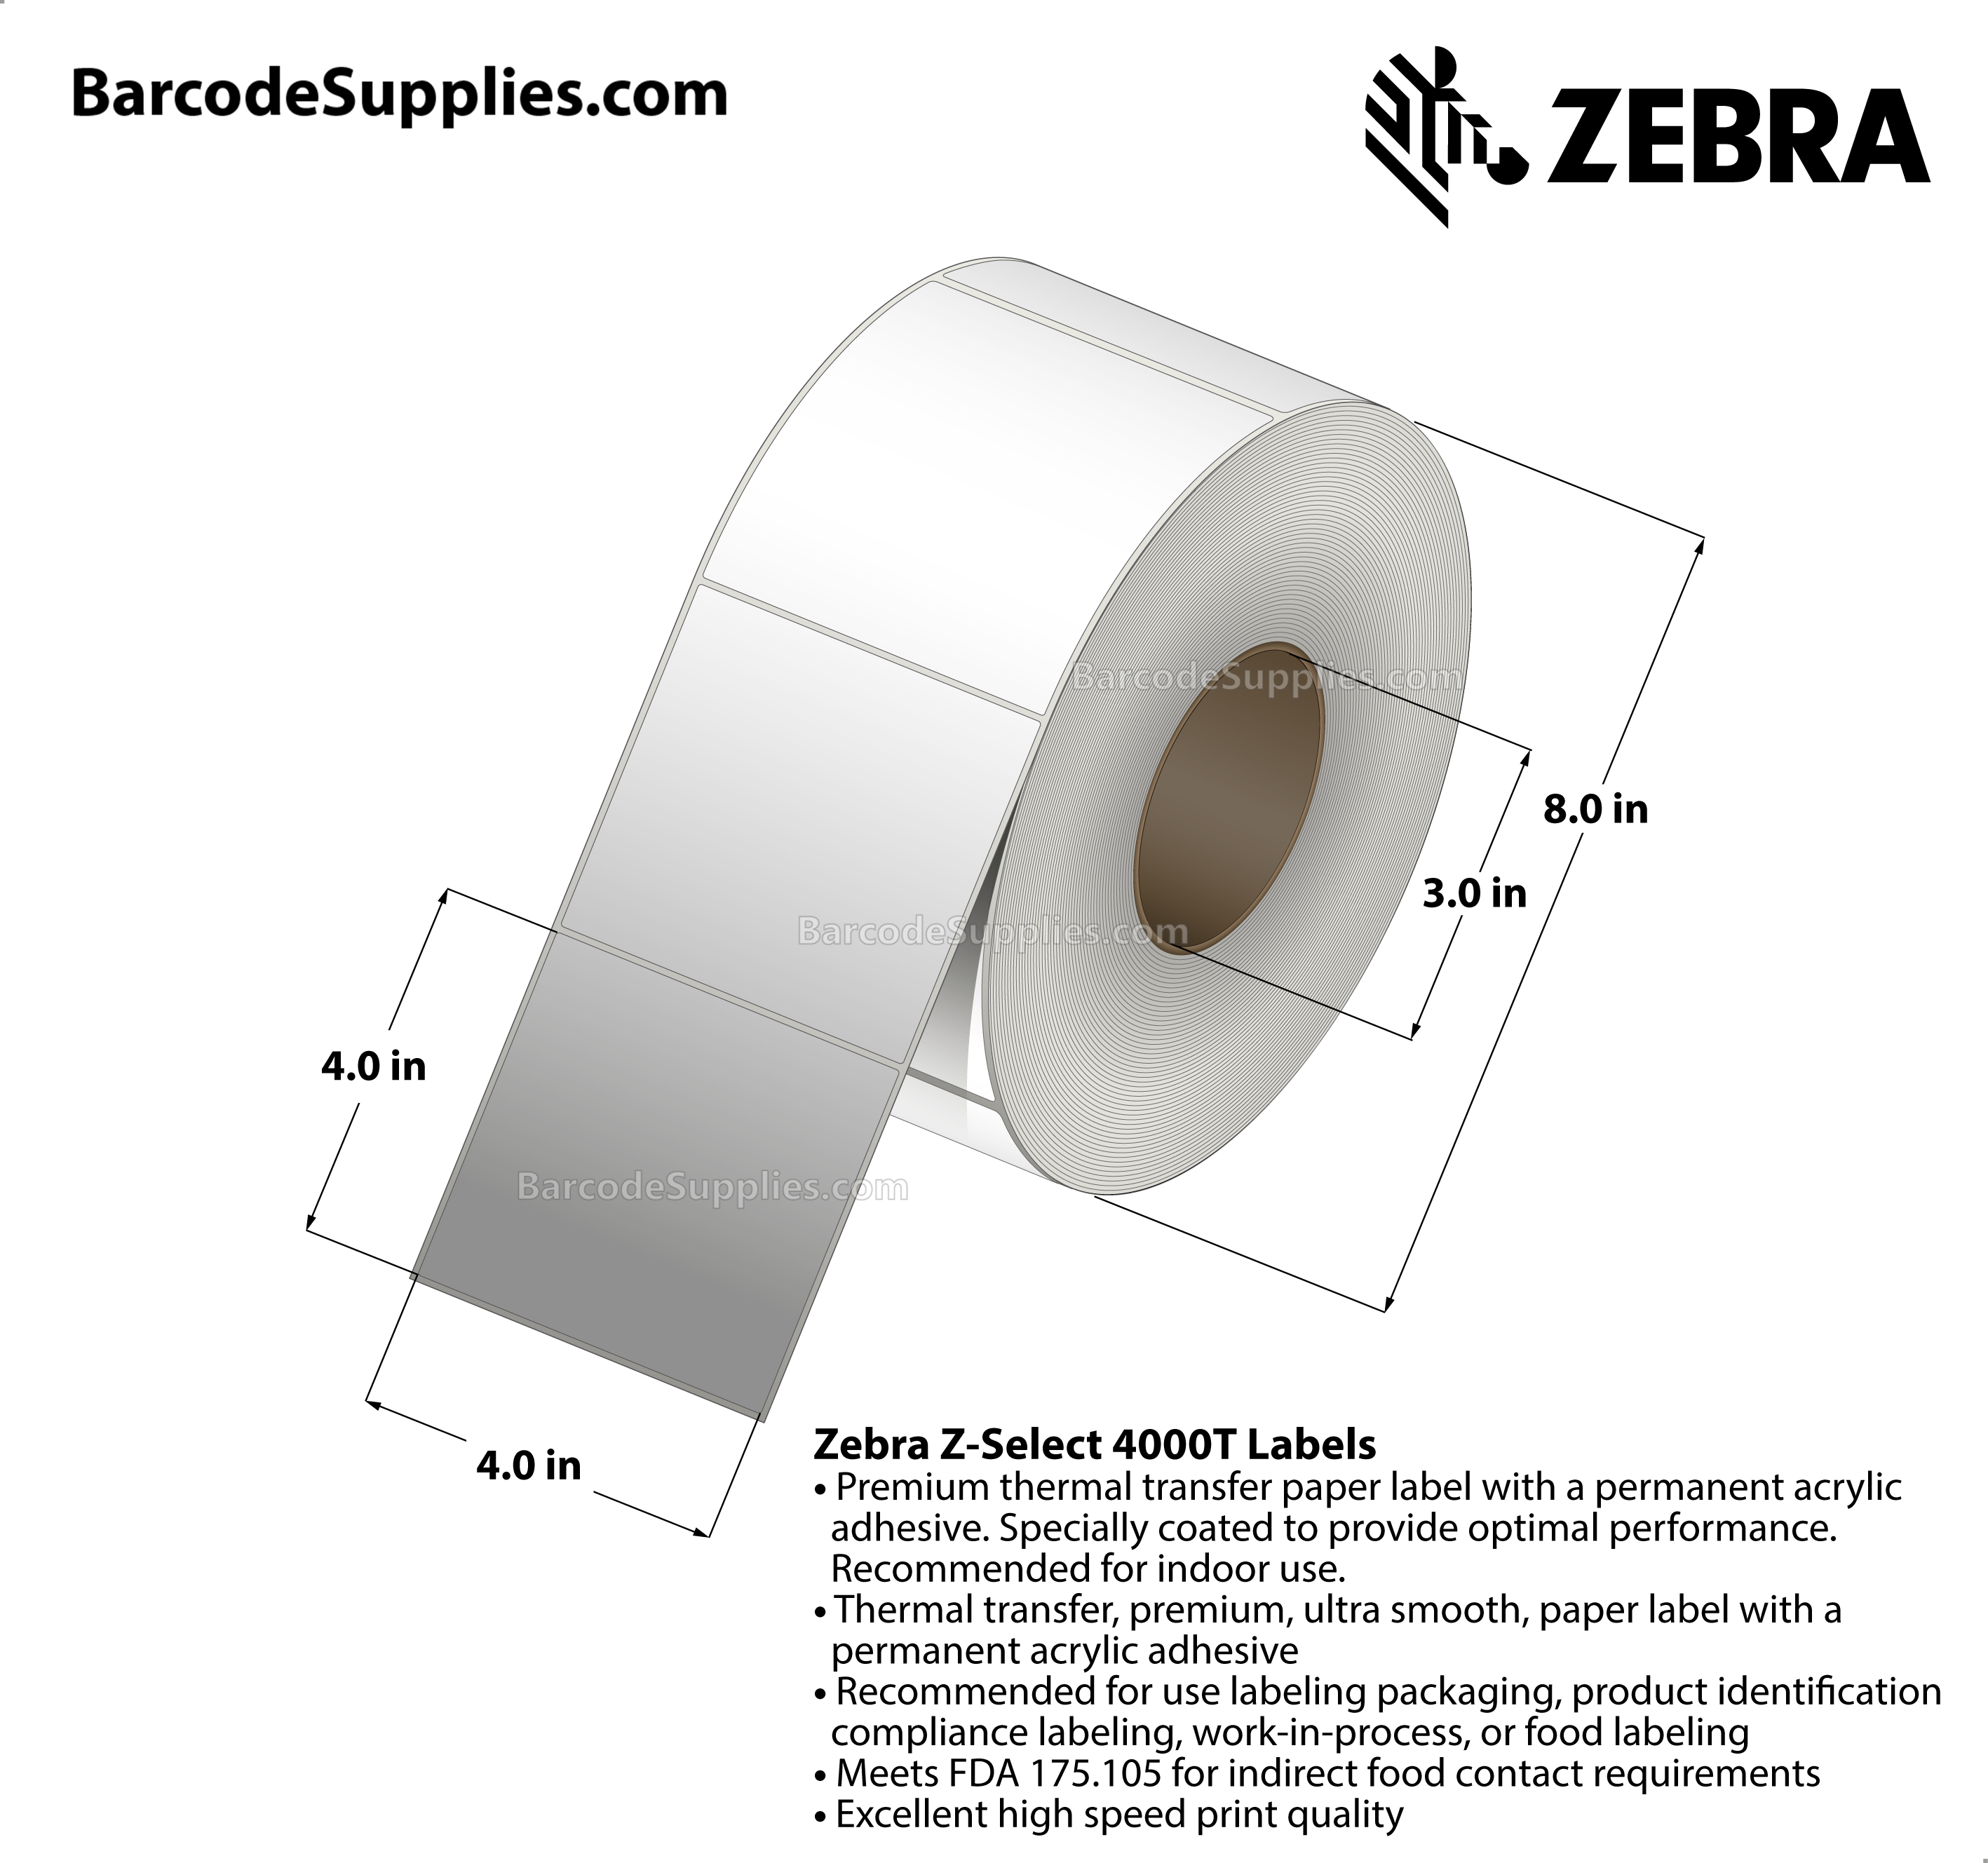 4 x 4 Thermal Transfer White Z-Select 4000T Labels With Permanent Adhesive - Not Perforated - 1410 Labels Per Roll - Carton Of 4 Rolls - 5640 Labels Total - MPN: 72292